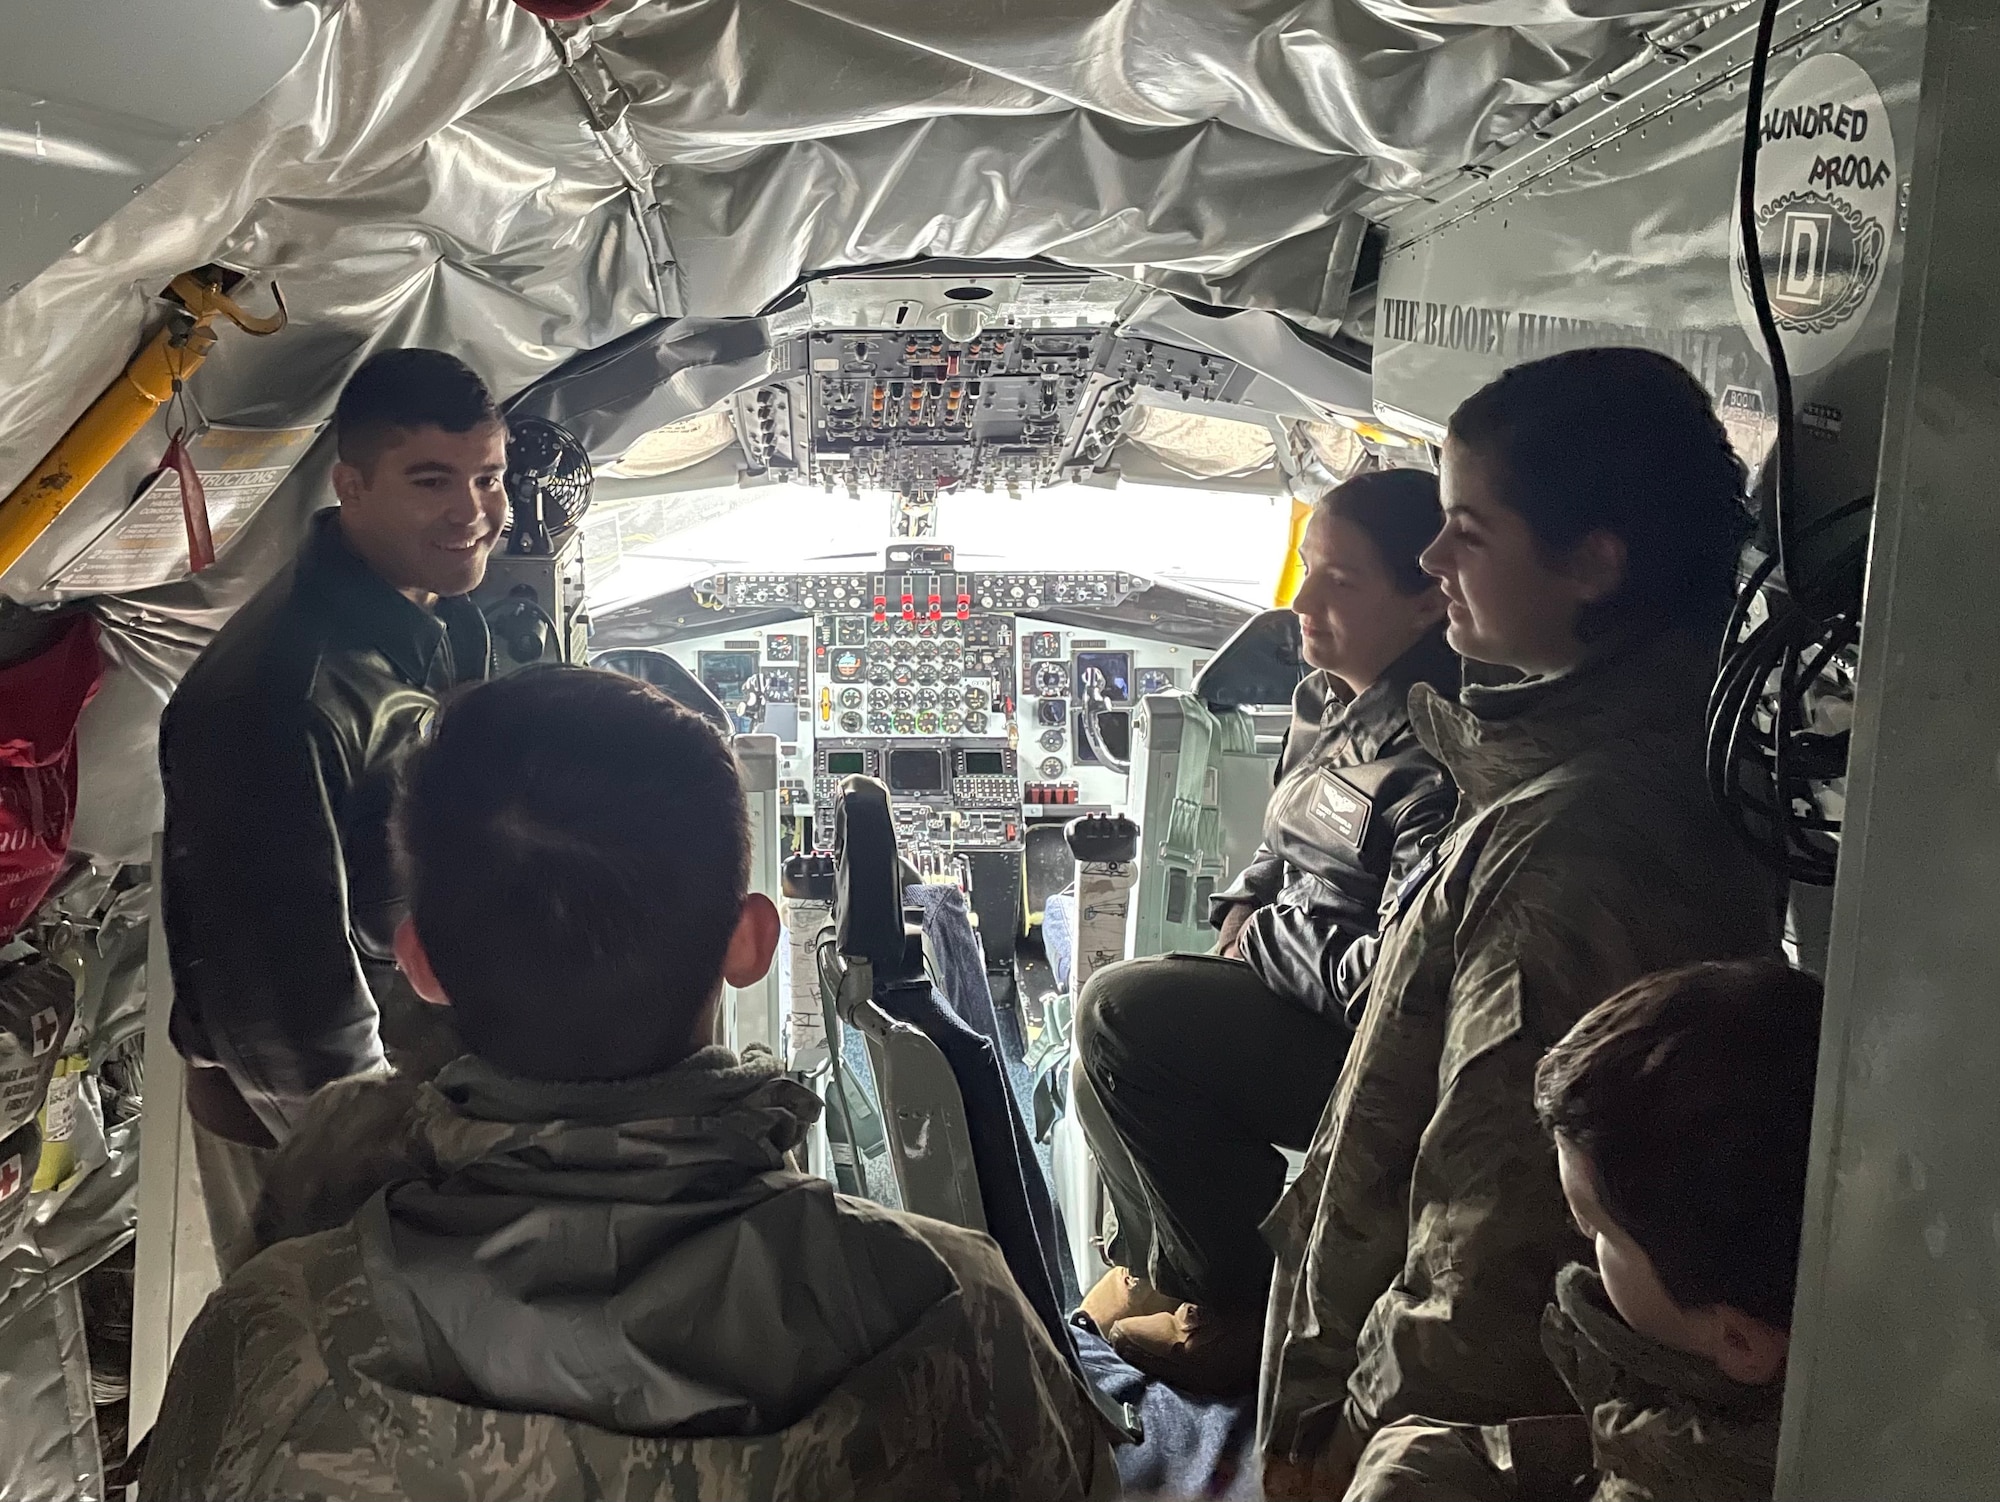 U.S. Air Force Airmen assigned to the 100th Air Refueling Wing discuss pilot training with members of the Mildenhall Cadet Squadron inside the cockpit of a KC-135 Stratotanker aircraft at Royal Air Force Mildenhall, England, Dec. 8, 2021. The cadets are part of the Civil Air Patrol cadet program and visited the base to tour a KC-135 static display. (U.S. Air Force photo by Senior Airman Joseph Barron)